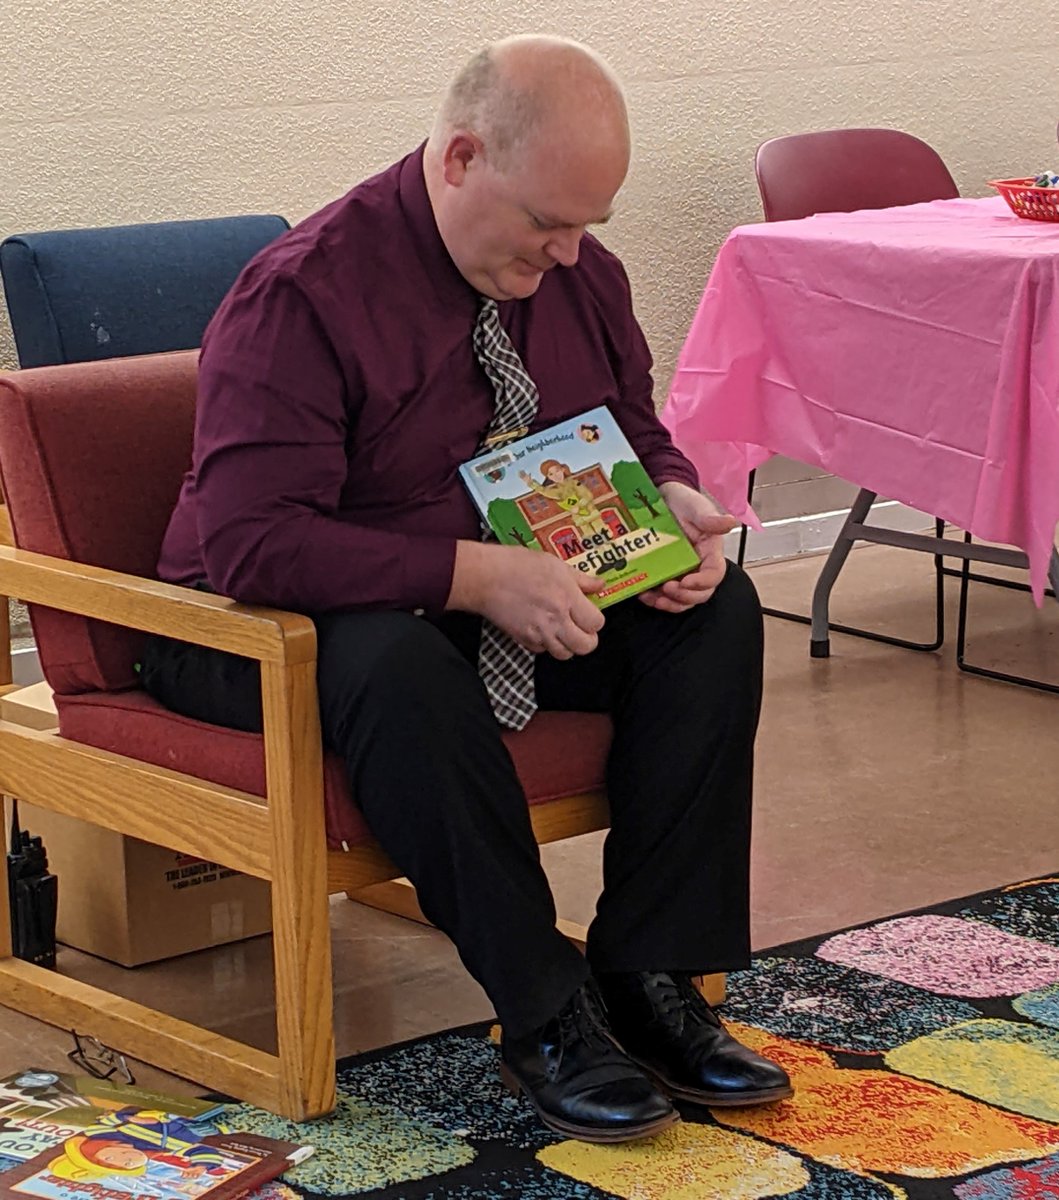 Thanks to MiVillage and @hollistonlib for allowing Chief @MRCfmFBC to read to your audiences during #FirePreventionWeek. nfpa.org/fpw